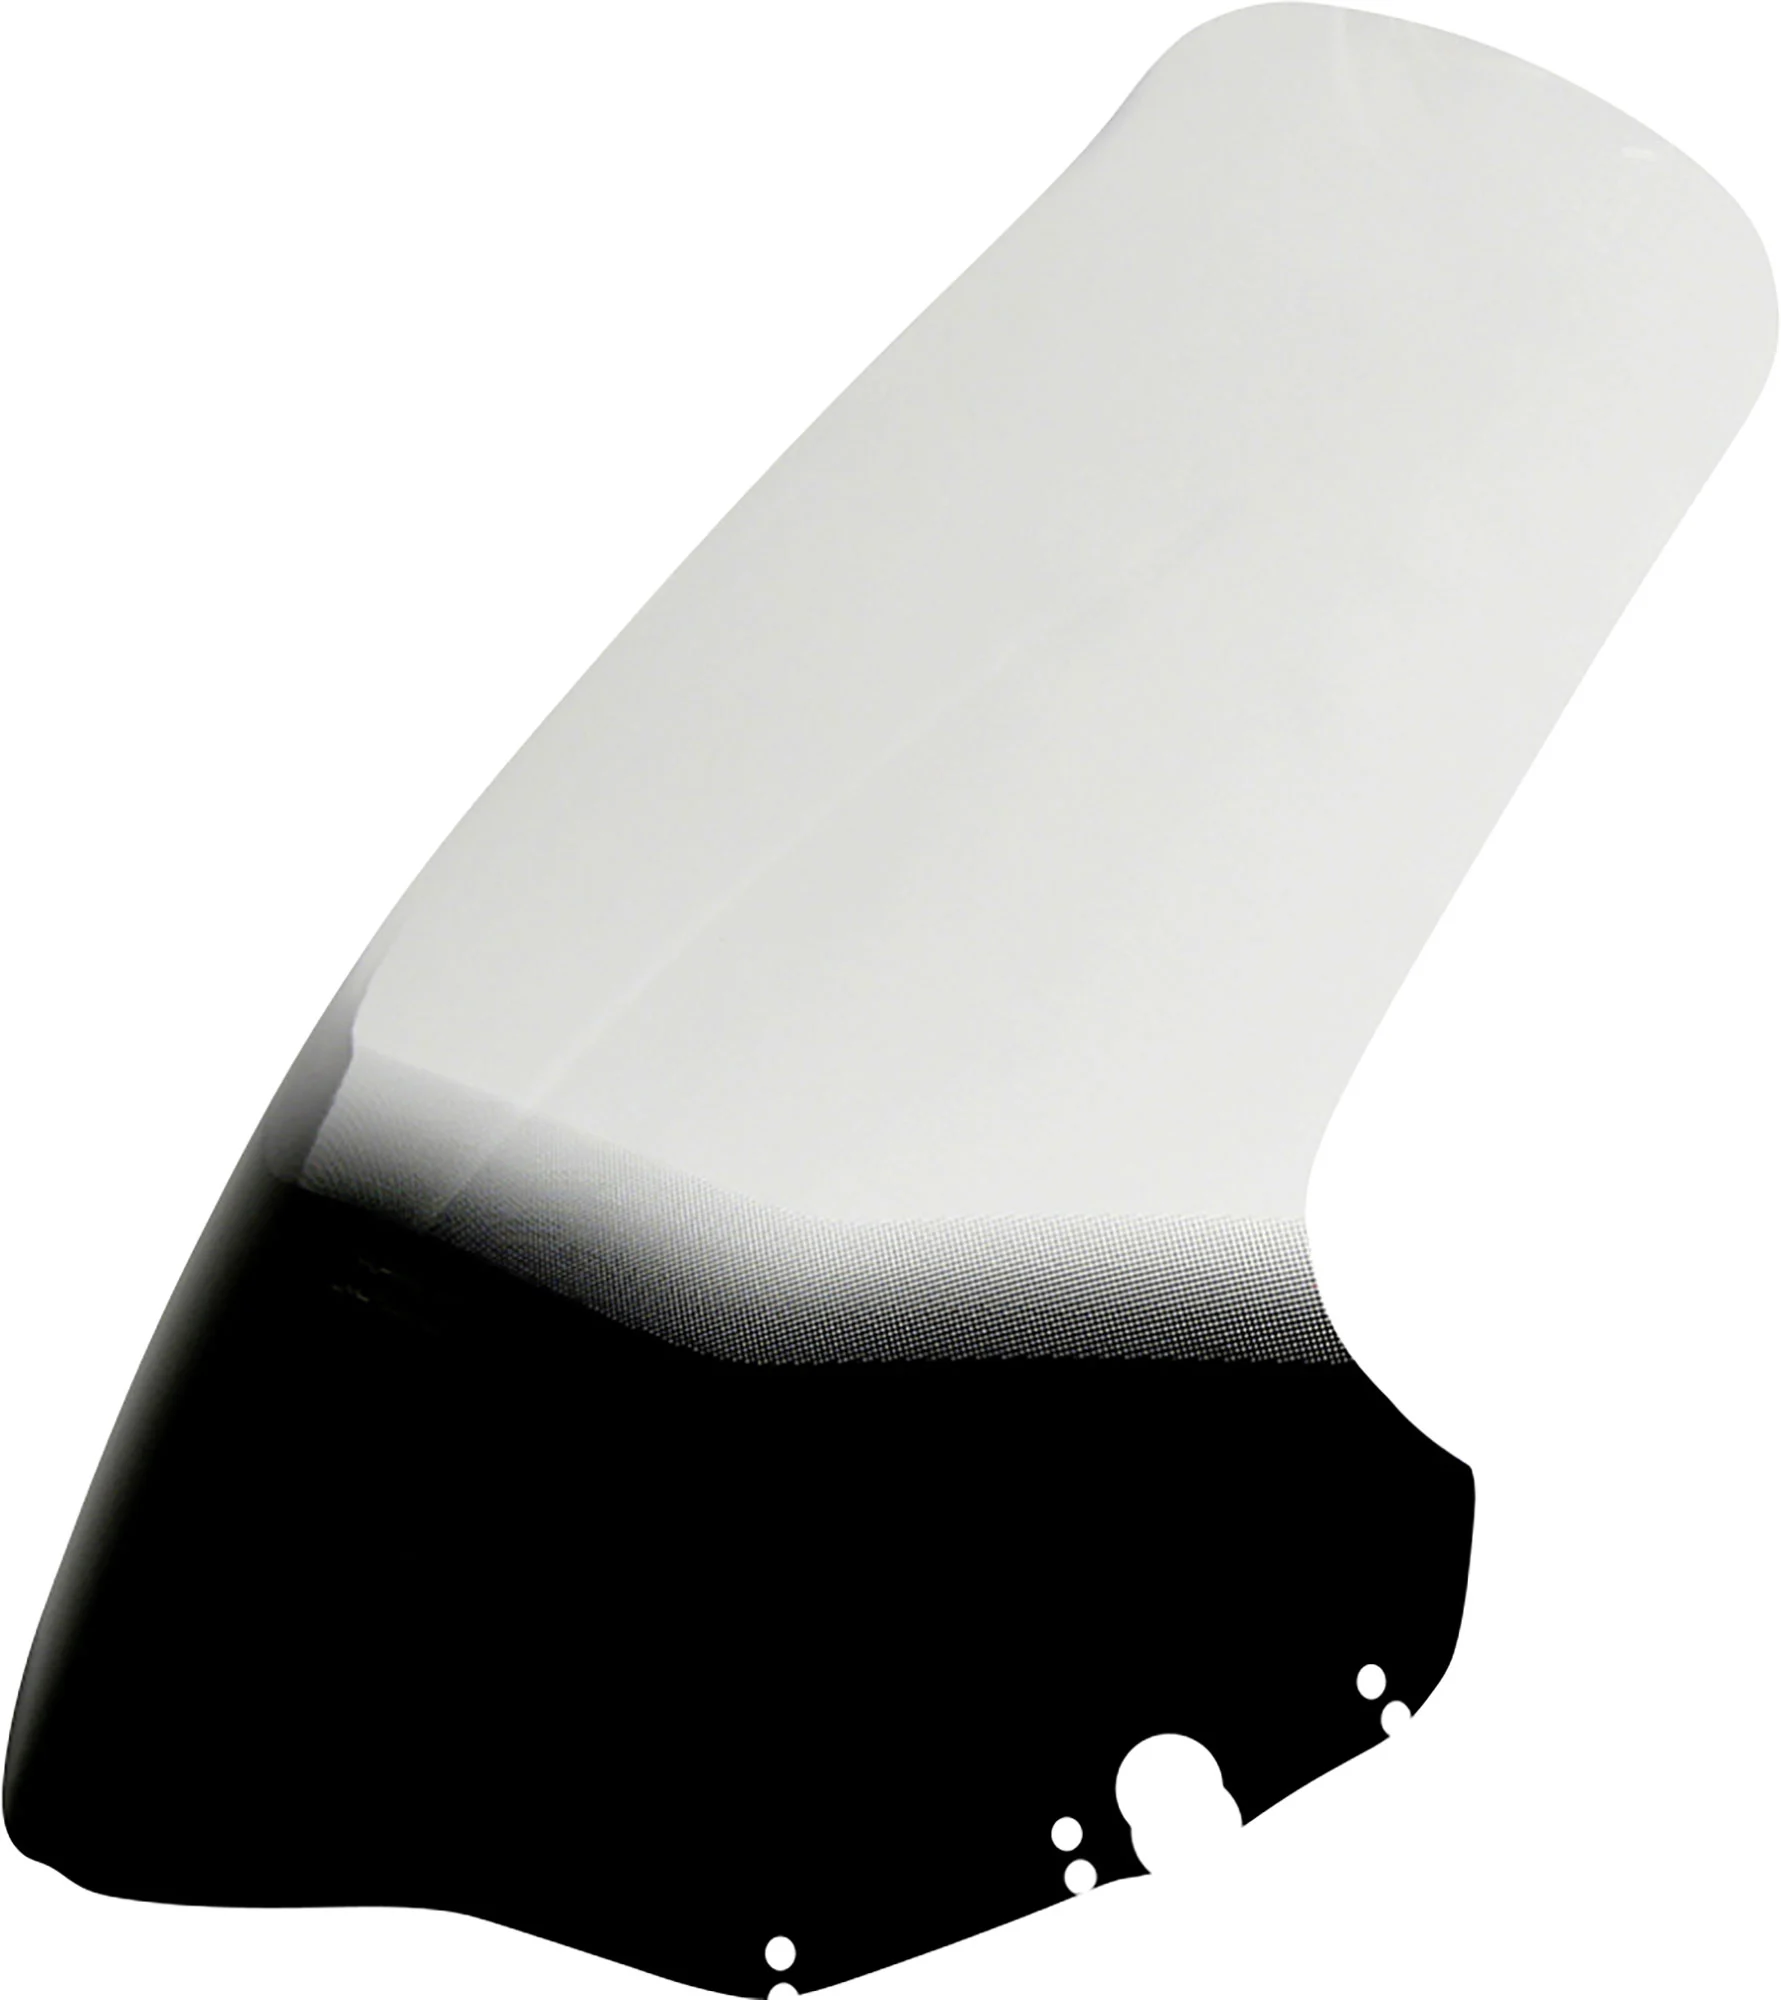 MRA TOURING SHIELD, CLEAR